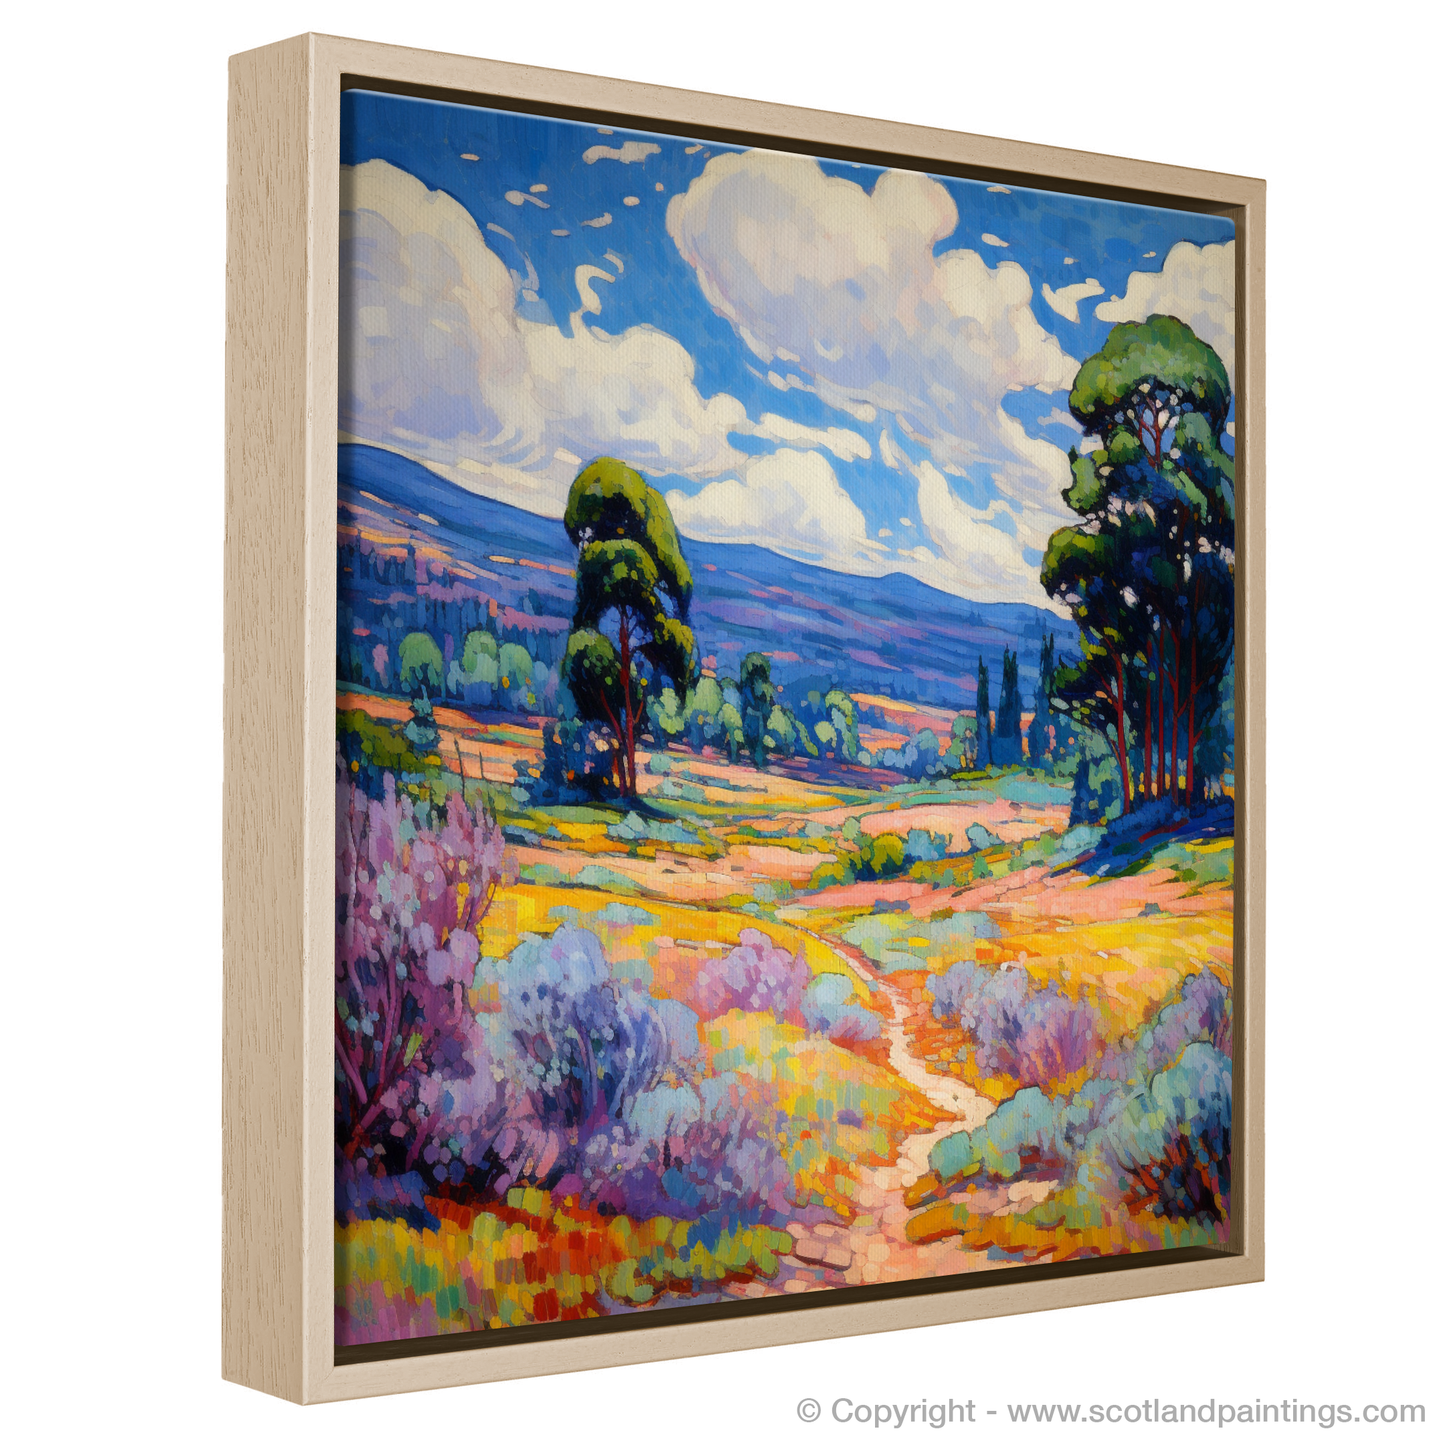 Painting and Art Print of Glen Tanar, Aberdeenshire in summer entitled "Summer Whispers of Glen Tanar".